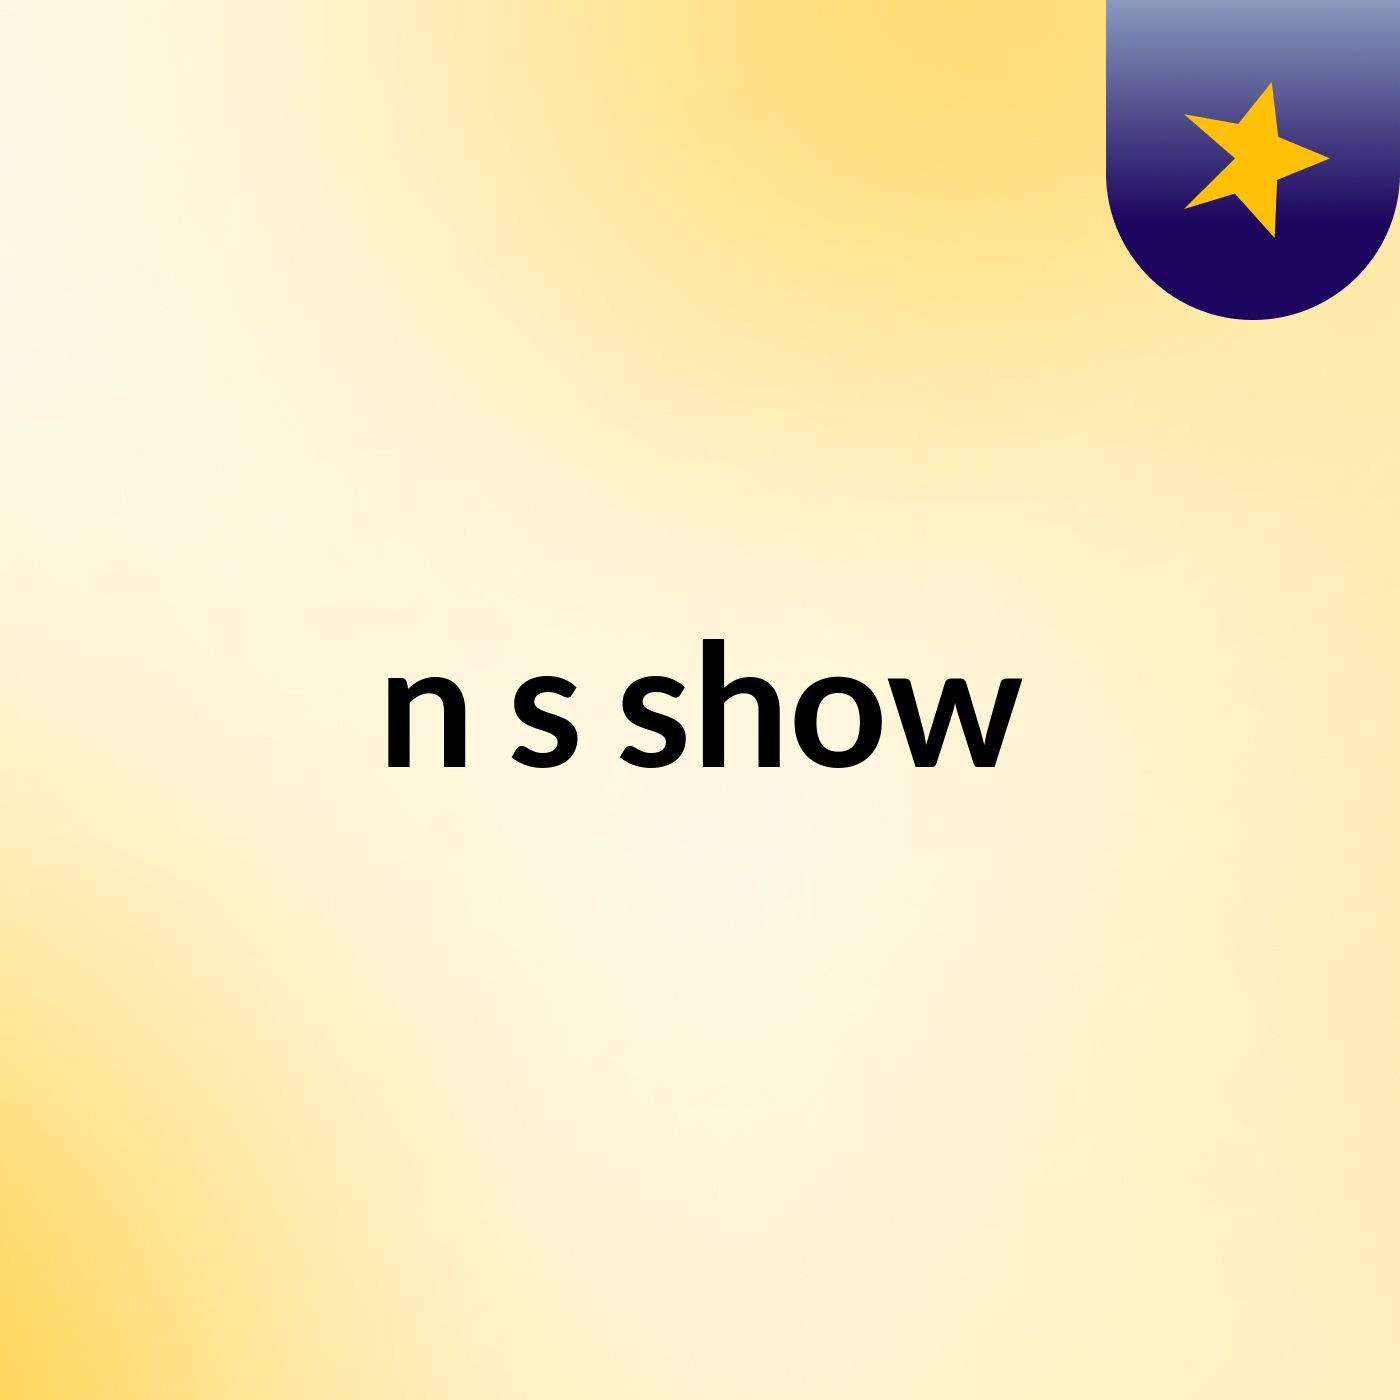 n's show